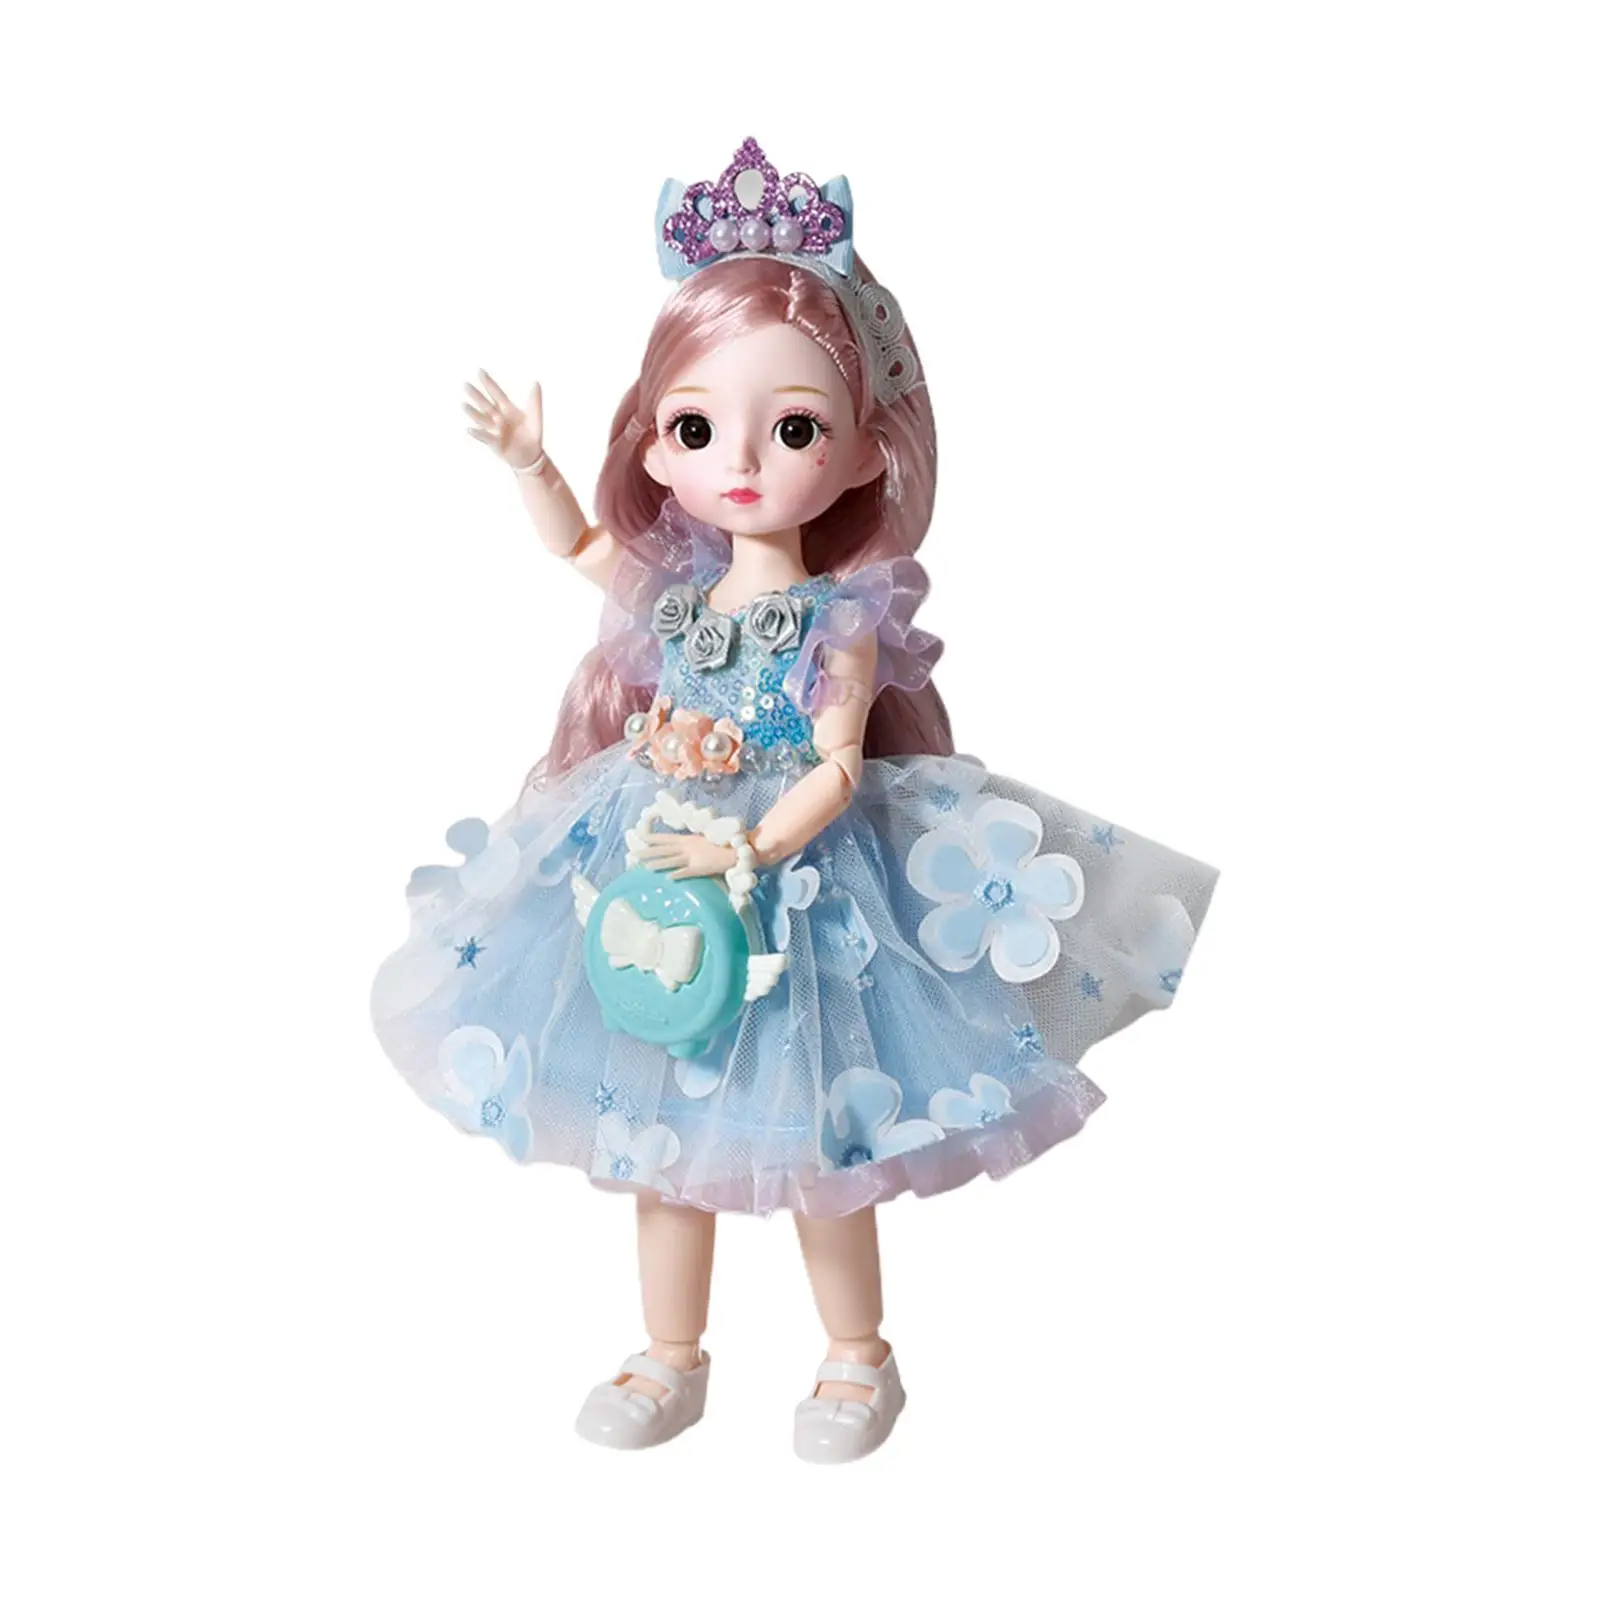 1/6 Fashion Doll Long Hair 23 Moveable Joints with Clothes and Shoes Dress Fashion Outfits Princess Doll Toy for Party